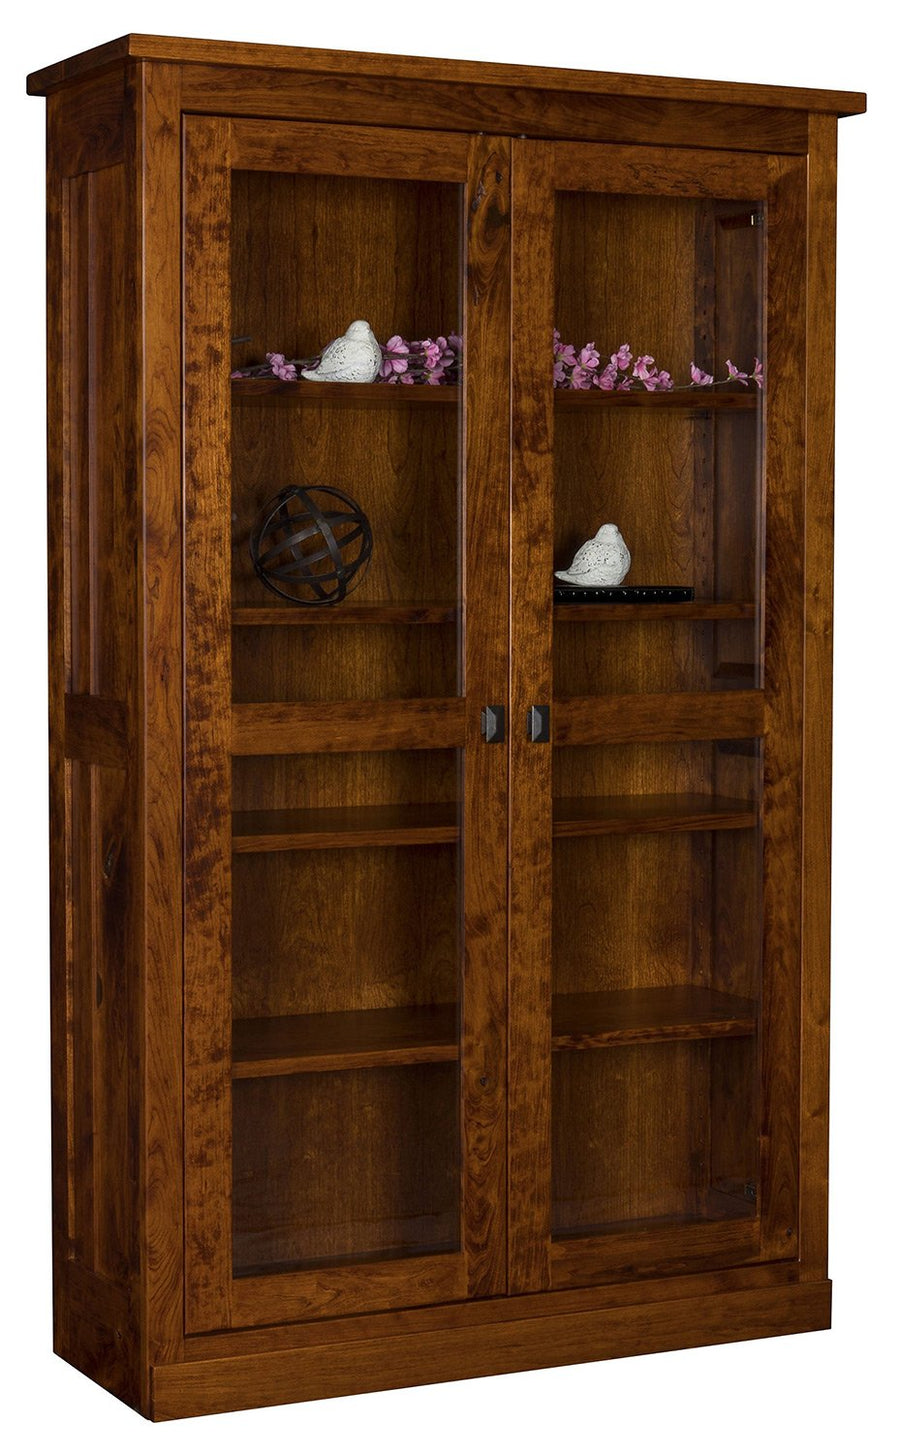 Freemont Amish Bookcase - Foothills Amish Furniture